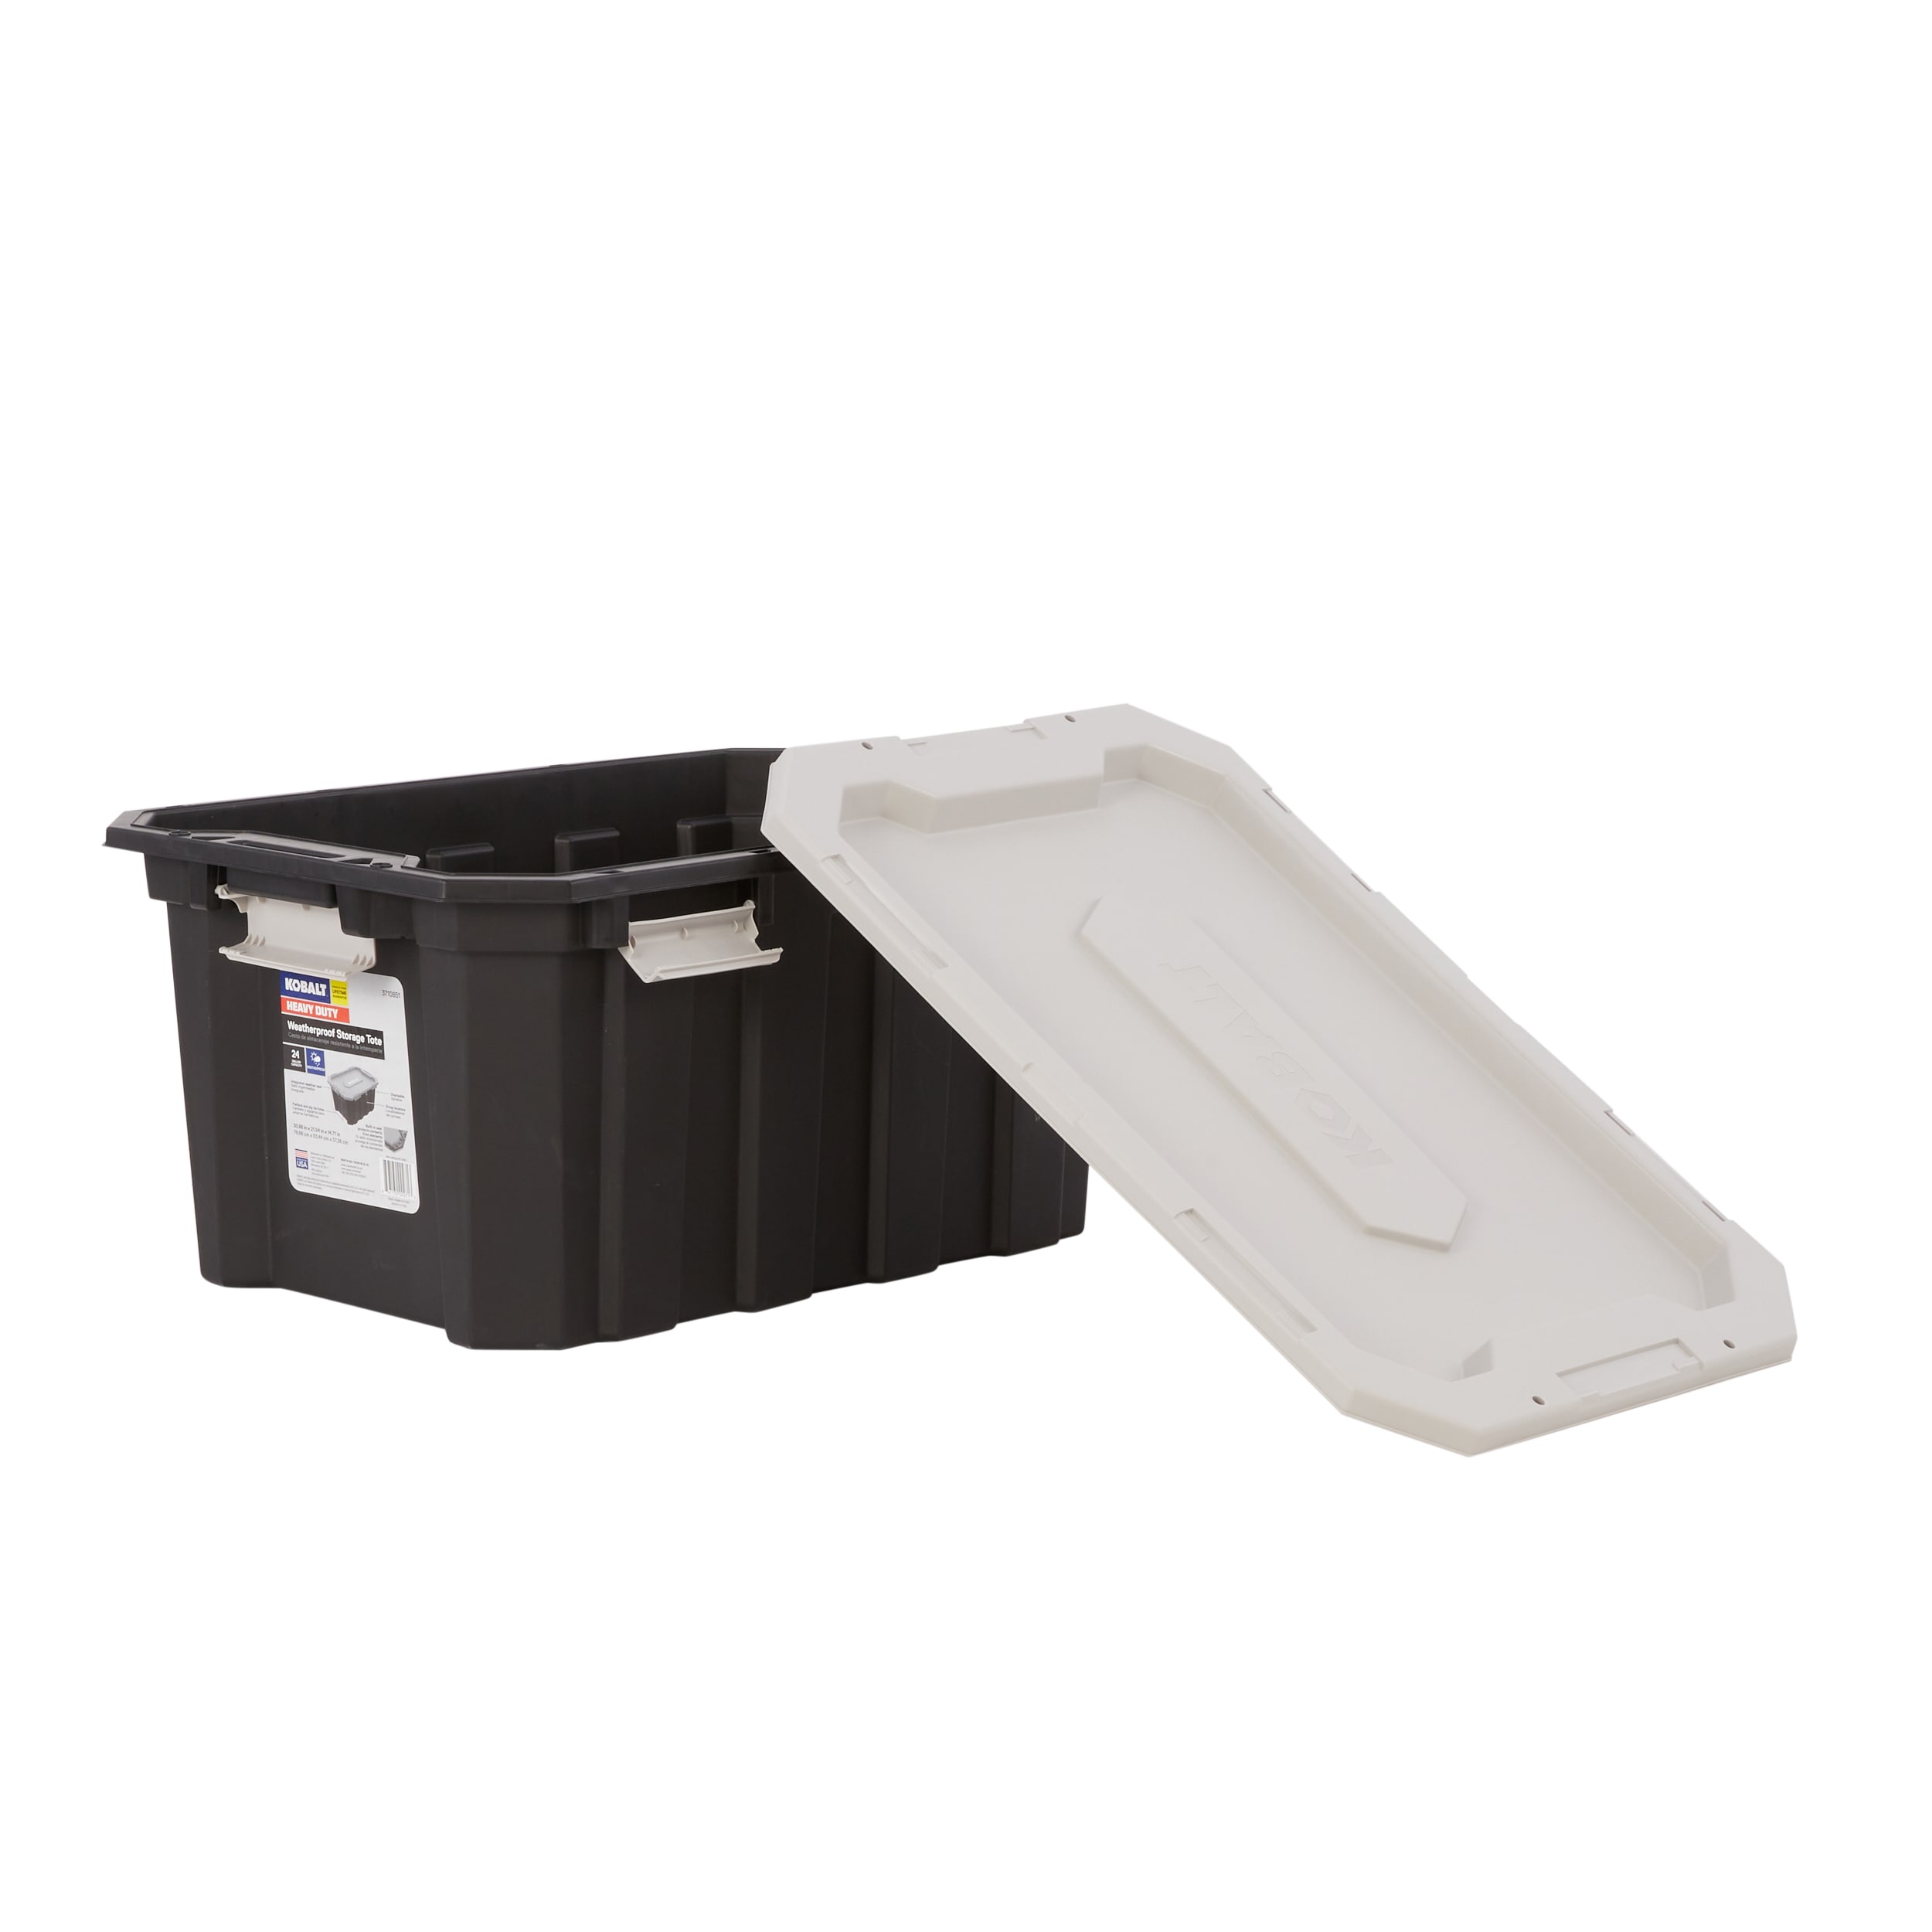 Kobalt Extra Large Tote with Latching Lid - Grey - 24 Gallon - Each